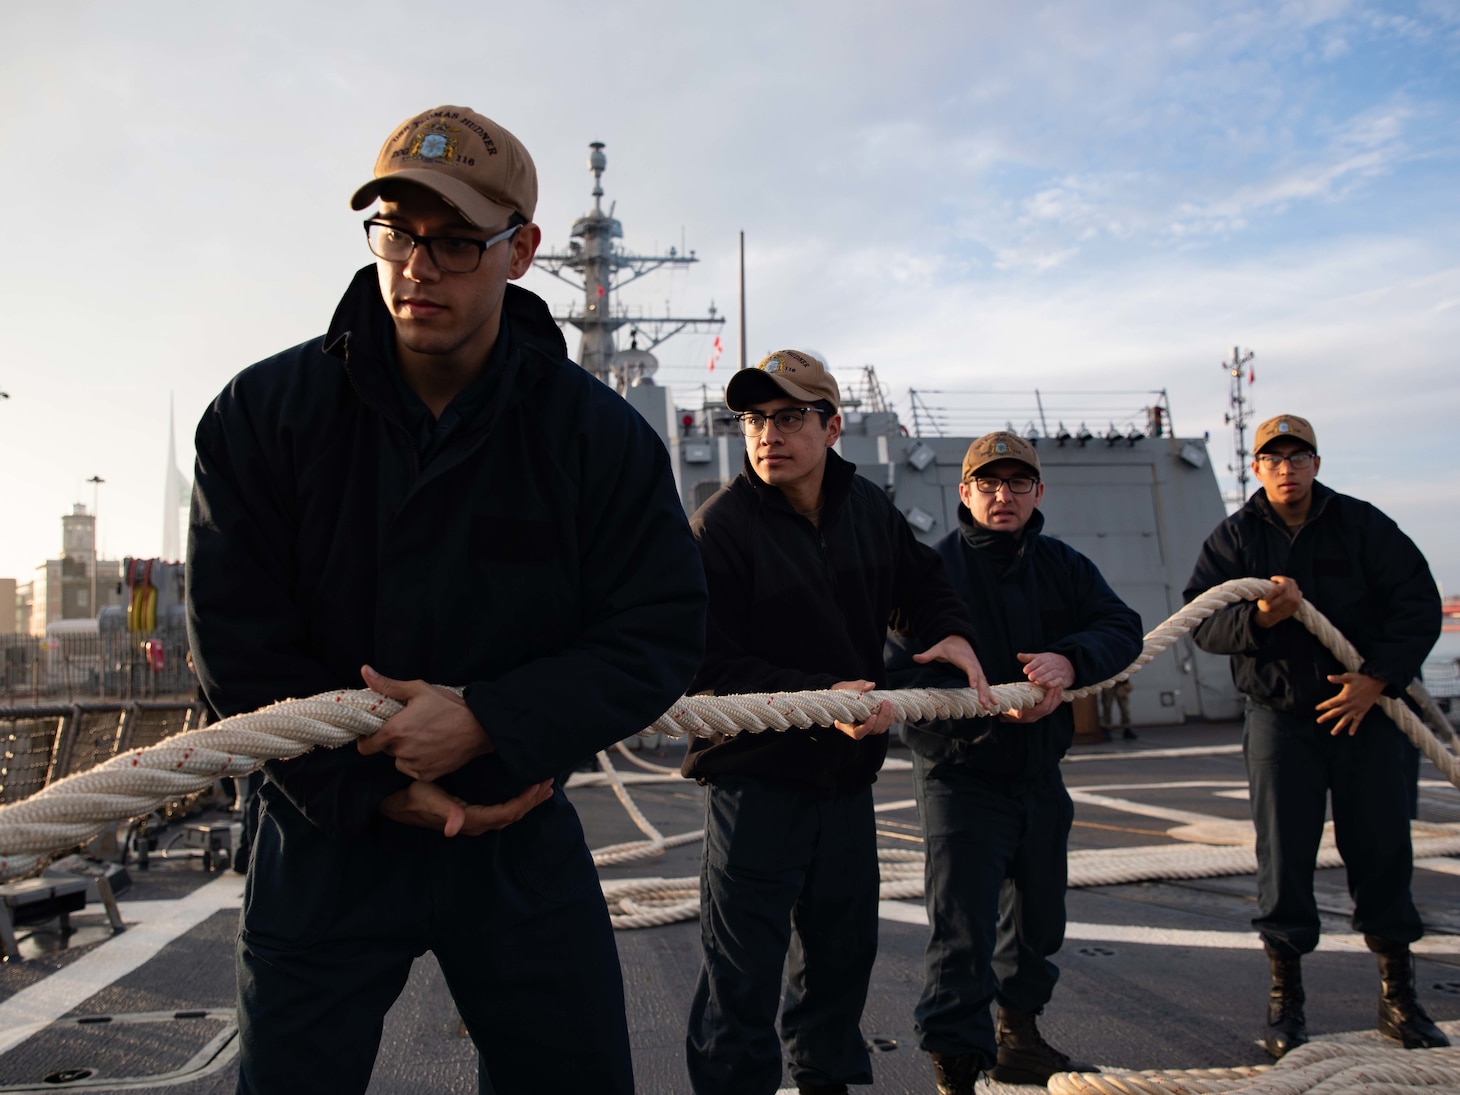 Sailors handle a mooring line aboard the Arleigh Burke-class guided missile destroyer USS Thomas Hudner (DDG 116) as part of the Gerald R. Ford Carrier Strike Group, as the ship ports in Portsmouth, England on Nov. 14, 2022. The first-in-class aircraft carrier USS Gerald R. Ford (CVN 78) is on its inaugural deployment conducting training and operations alongside NATO Allies and partners to enhance integration for future operations and demonstrate the U.S. Navy’s commitment to a peaceful, stable and conflict-free Atlantic region. (U.S. Navy photo by Mass Communication Specialist 3rd Class Chelsea Palmer)